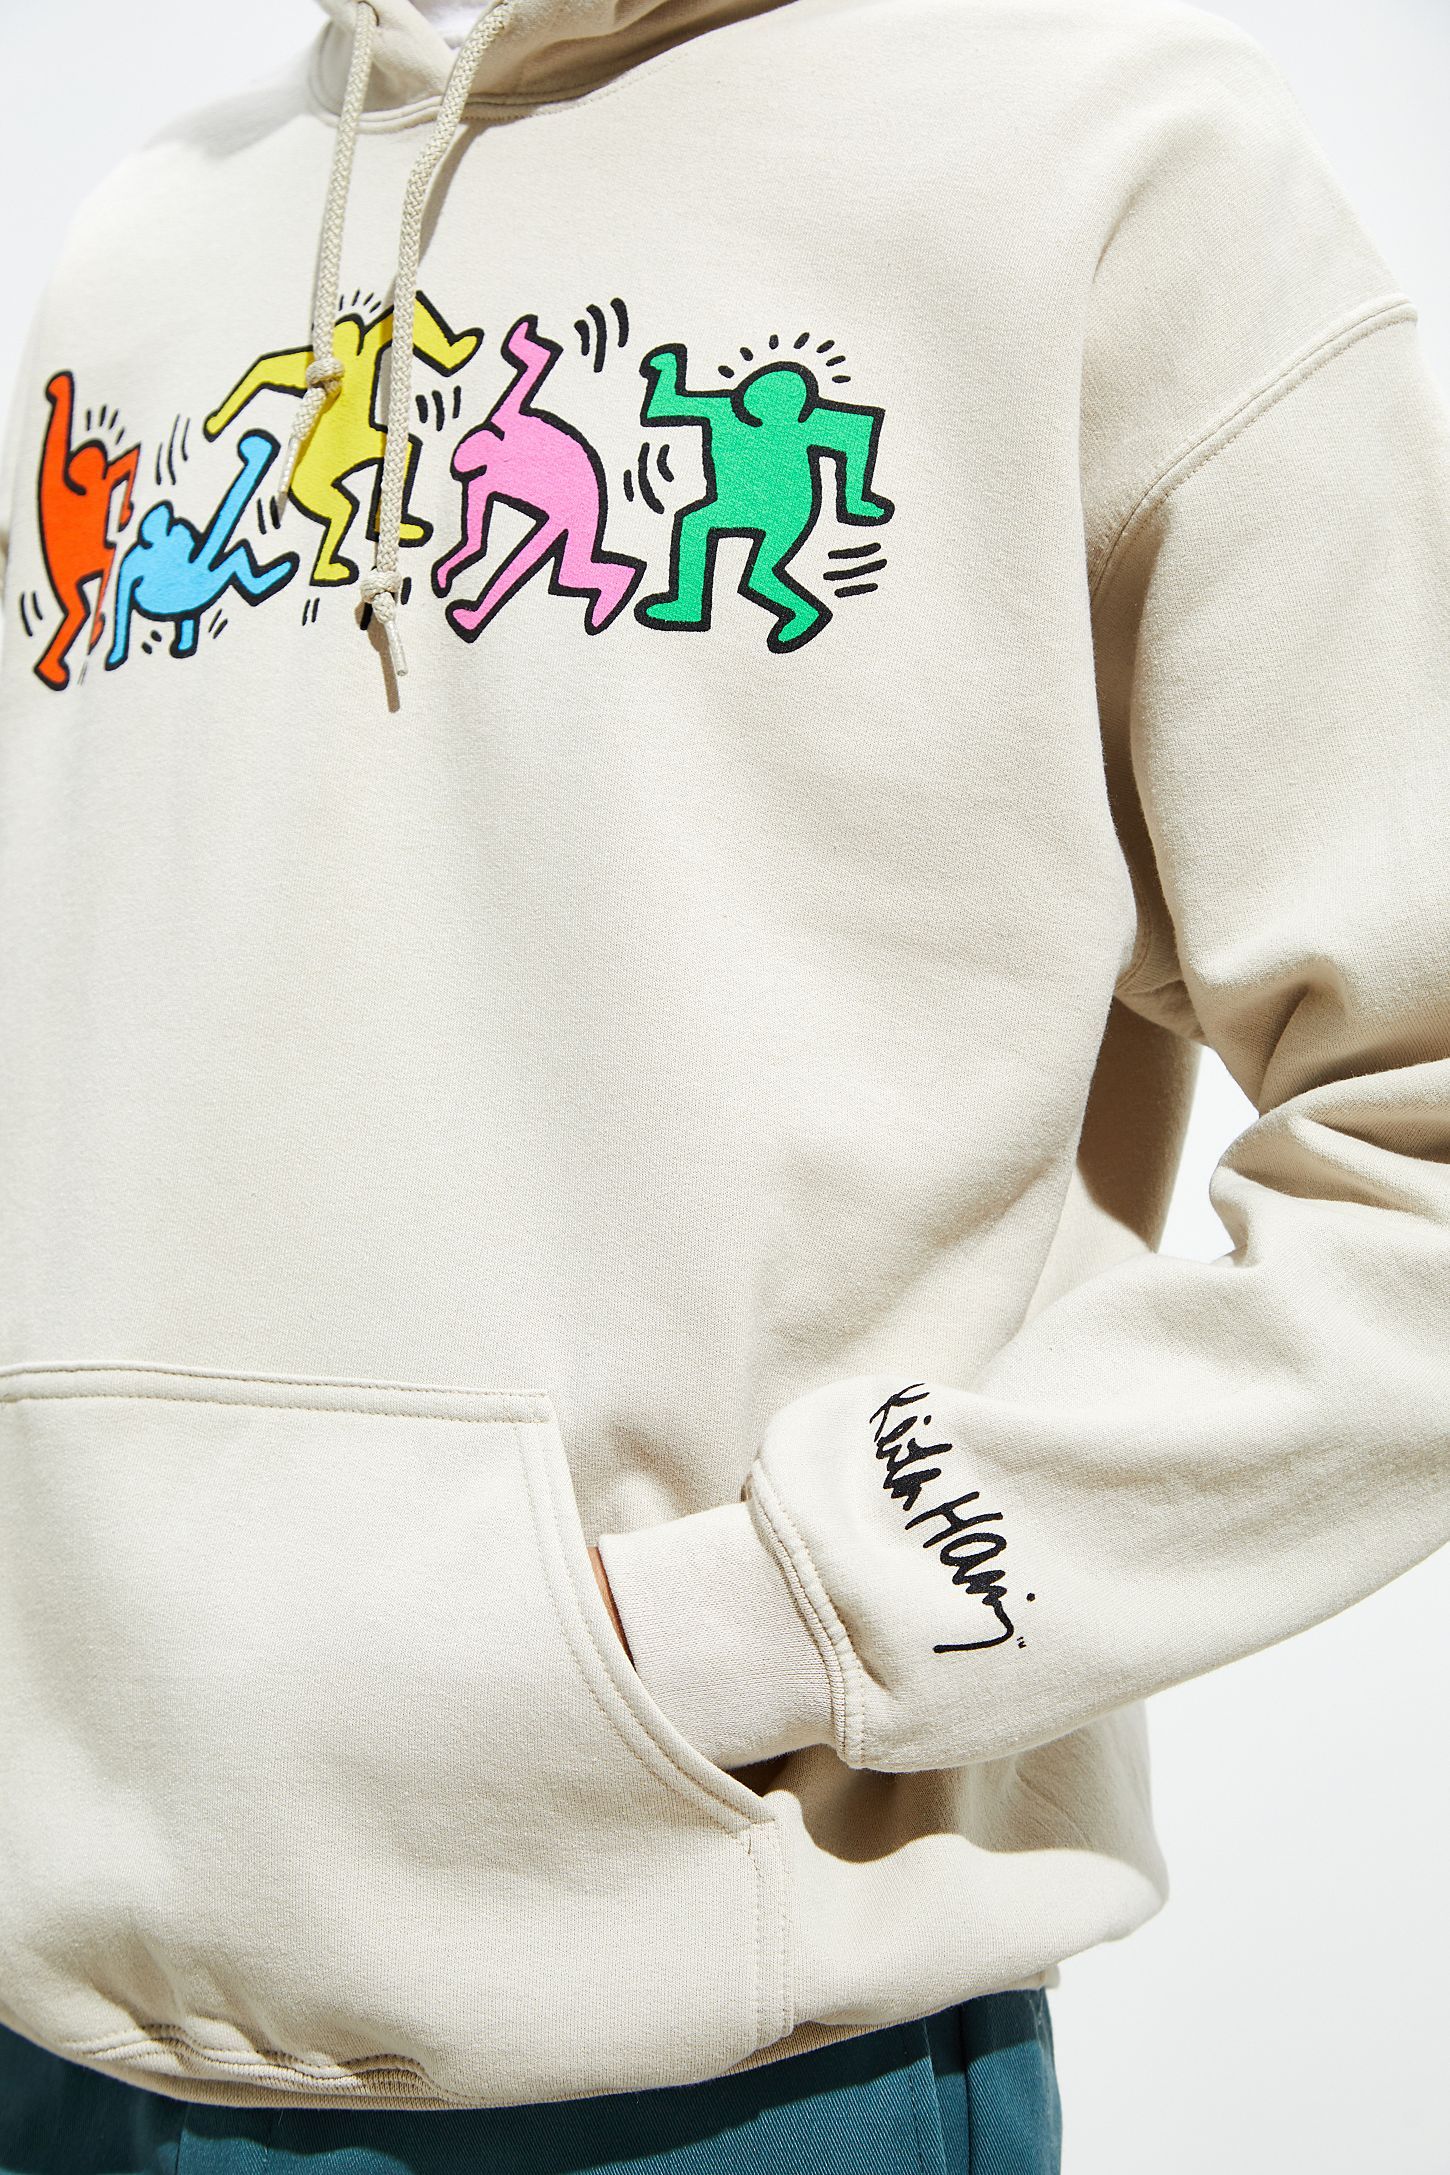 Getting the Software application to Energy up Your Keith Haring Hoodie